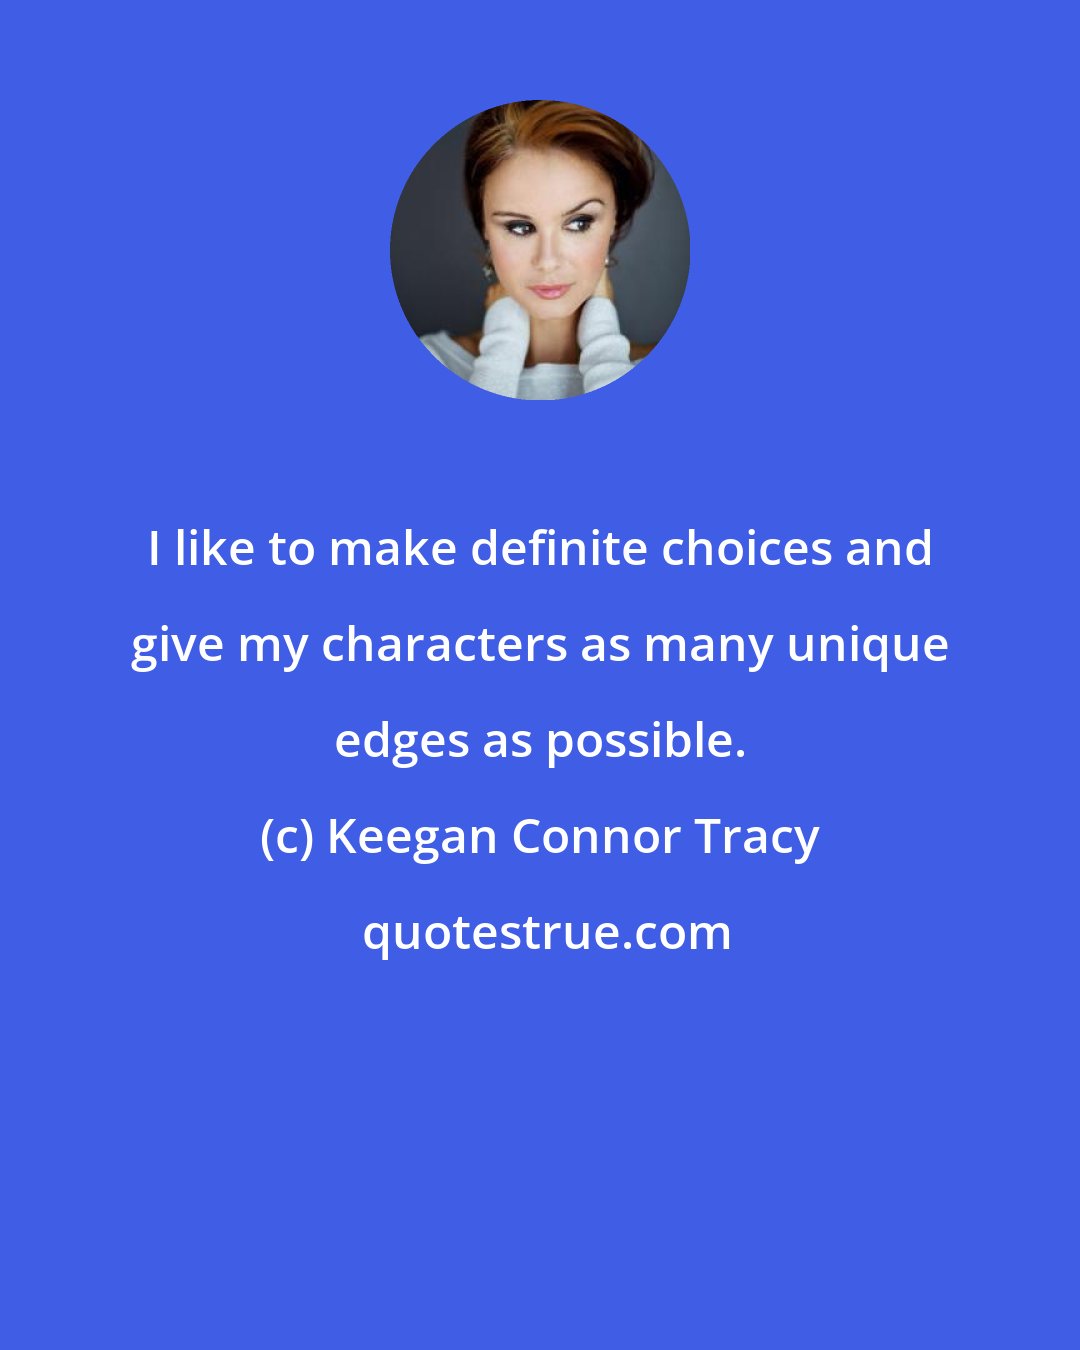 Keegan Connor Tracy: I like to make definite choices and give my characters as many unique edges as possible.